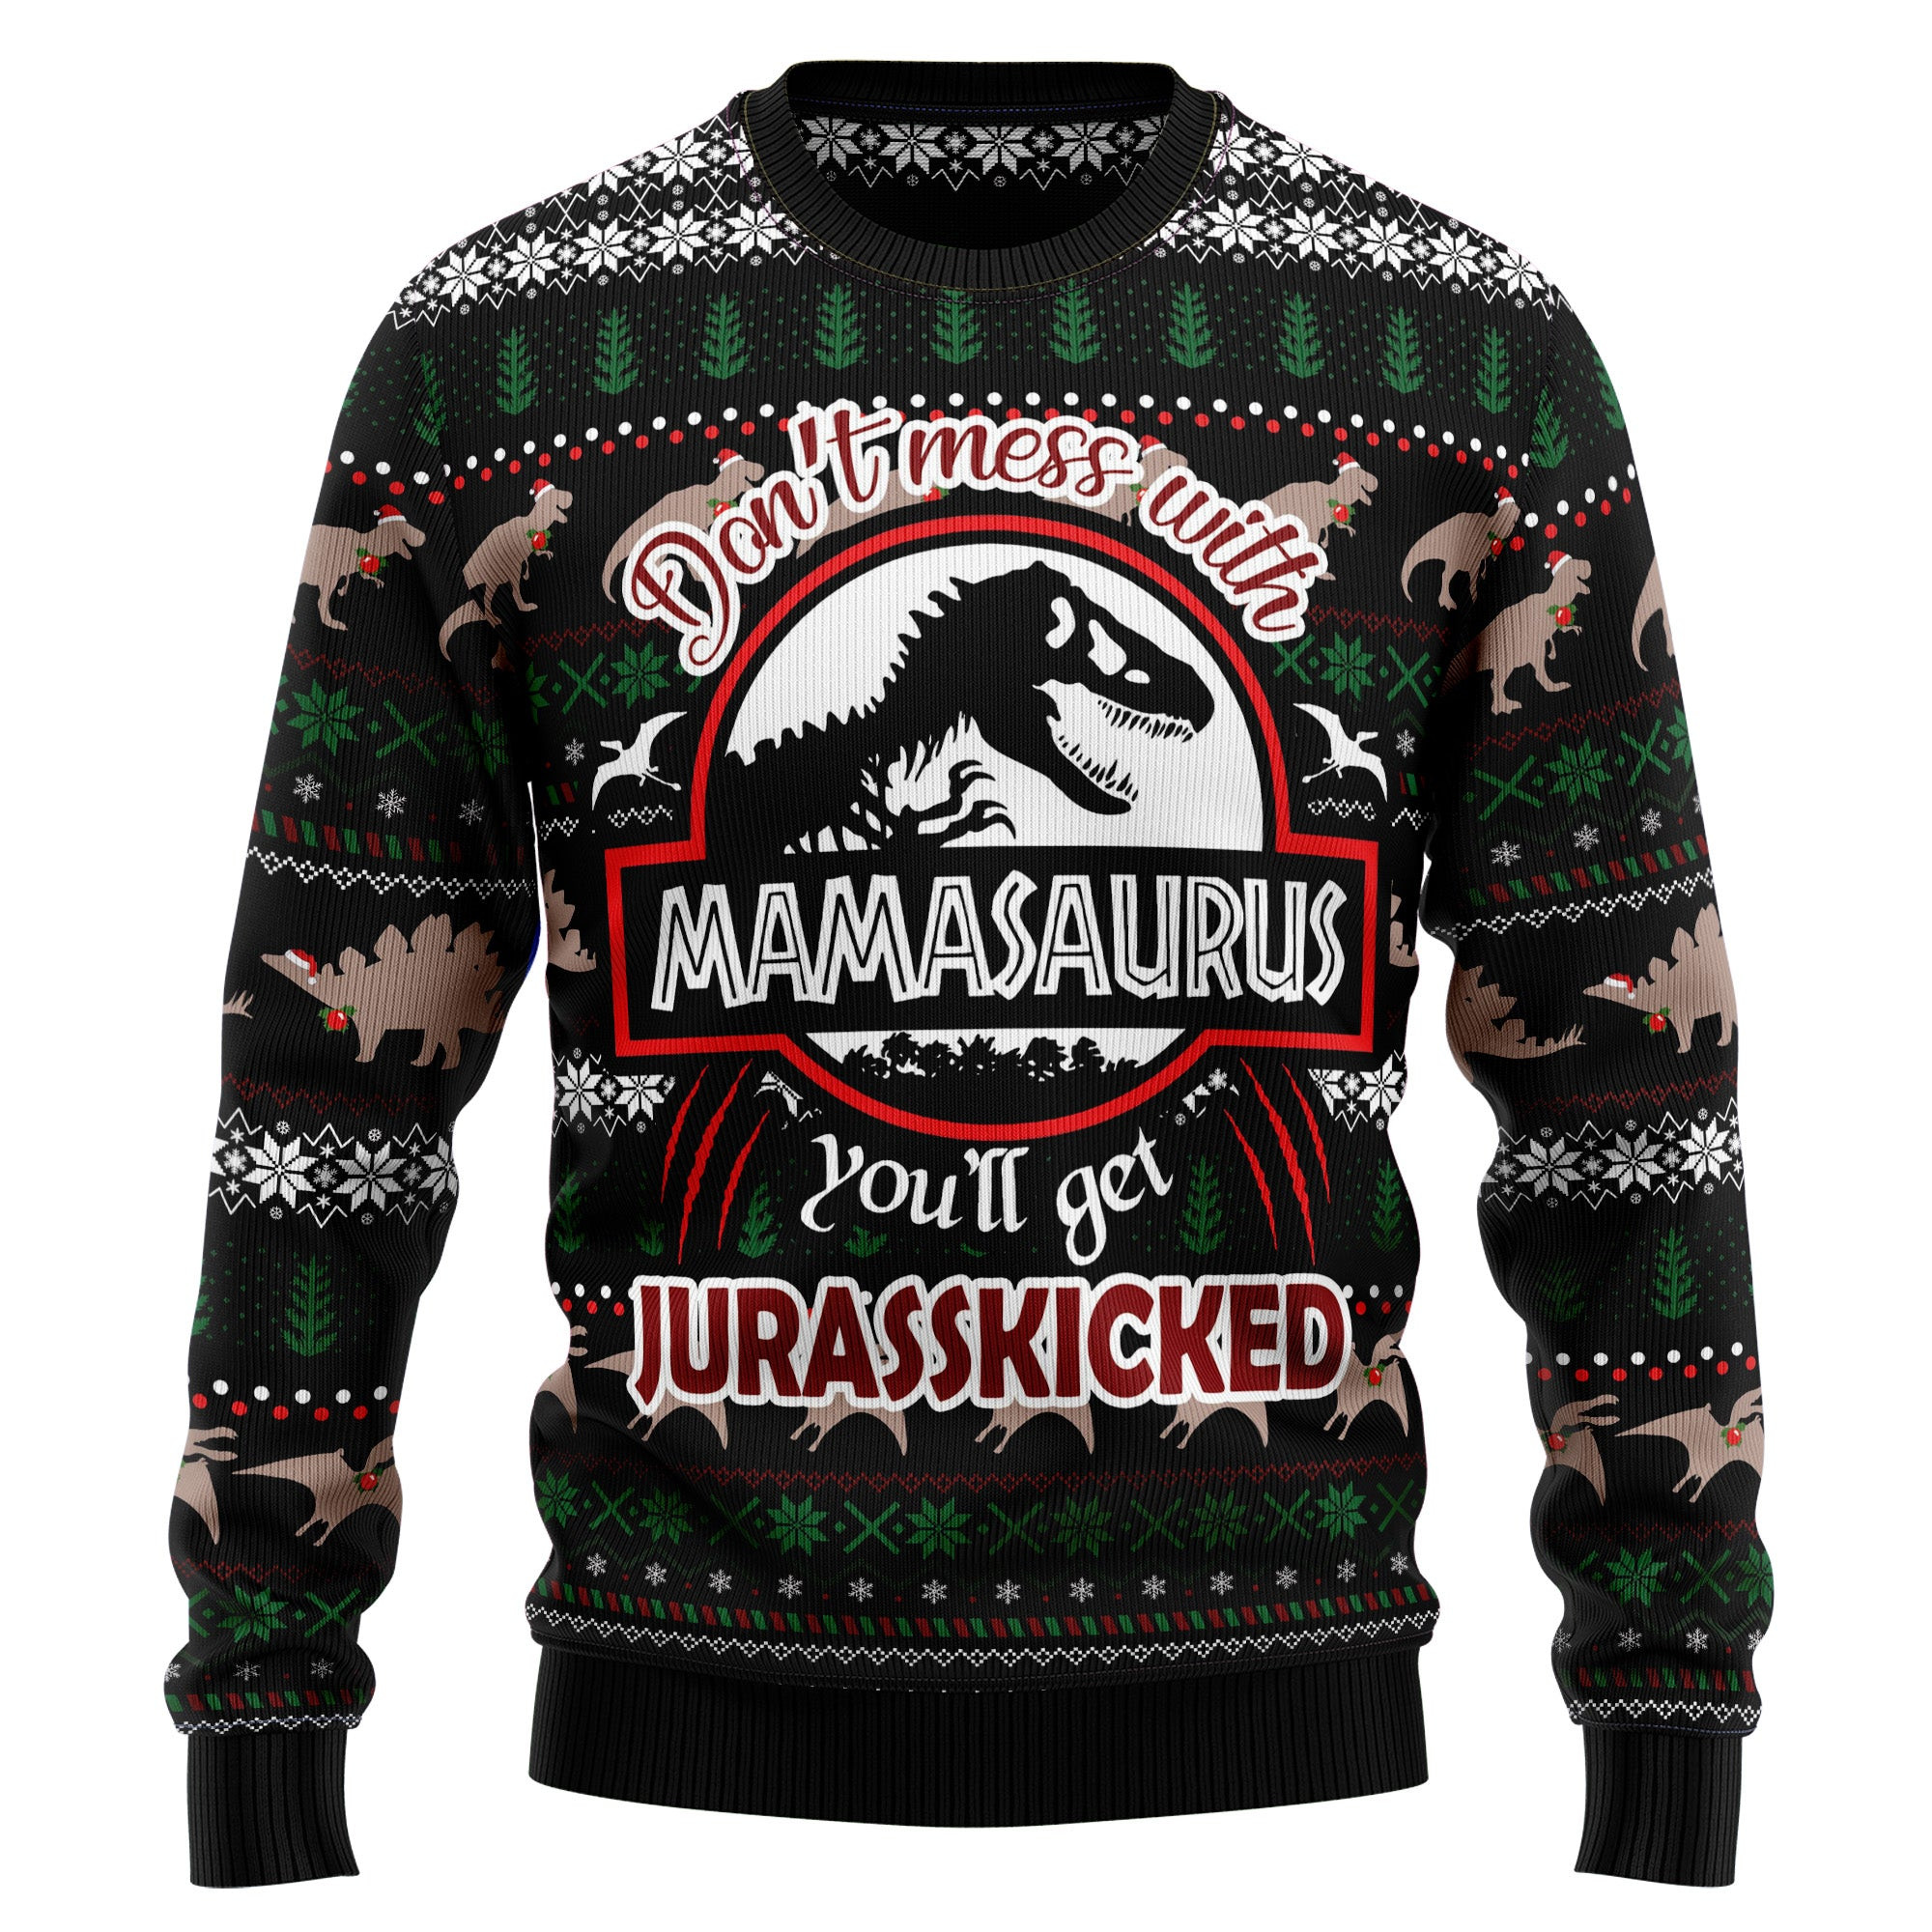 Dinosaur Mamasaurus Ugly Christmas Sweater, Ugly Sweater For Men Women, Holiday Sweater